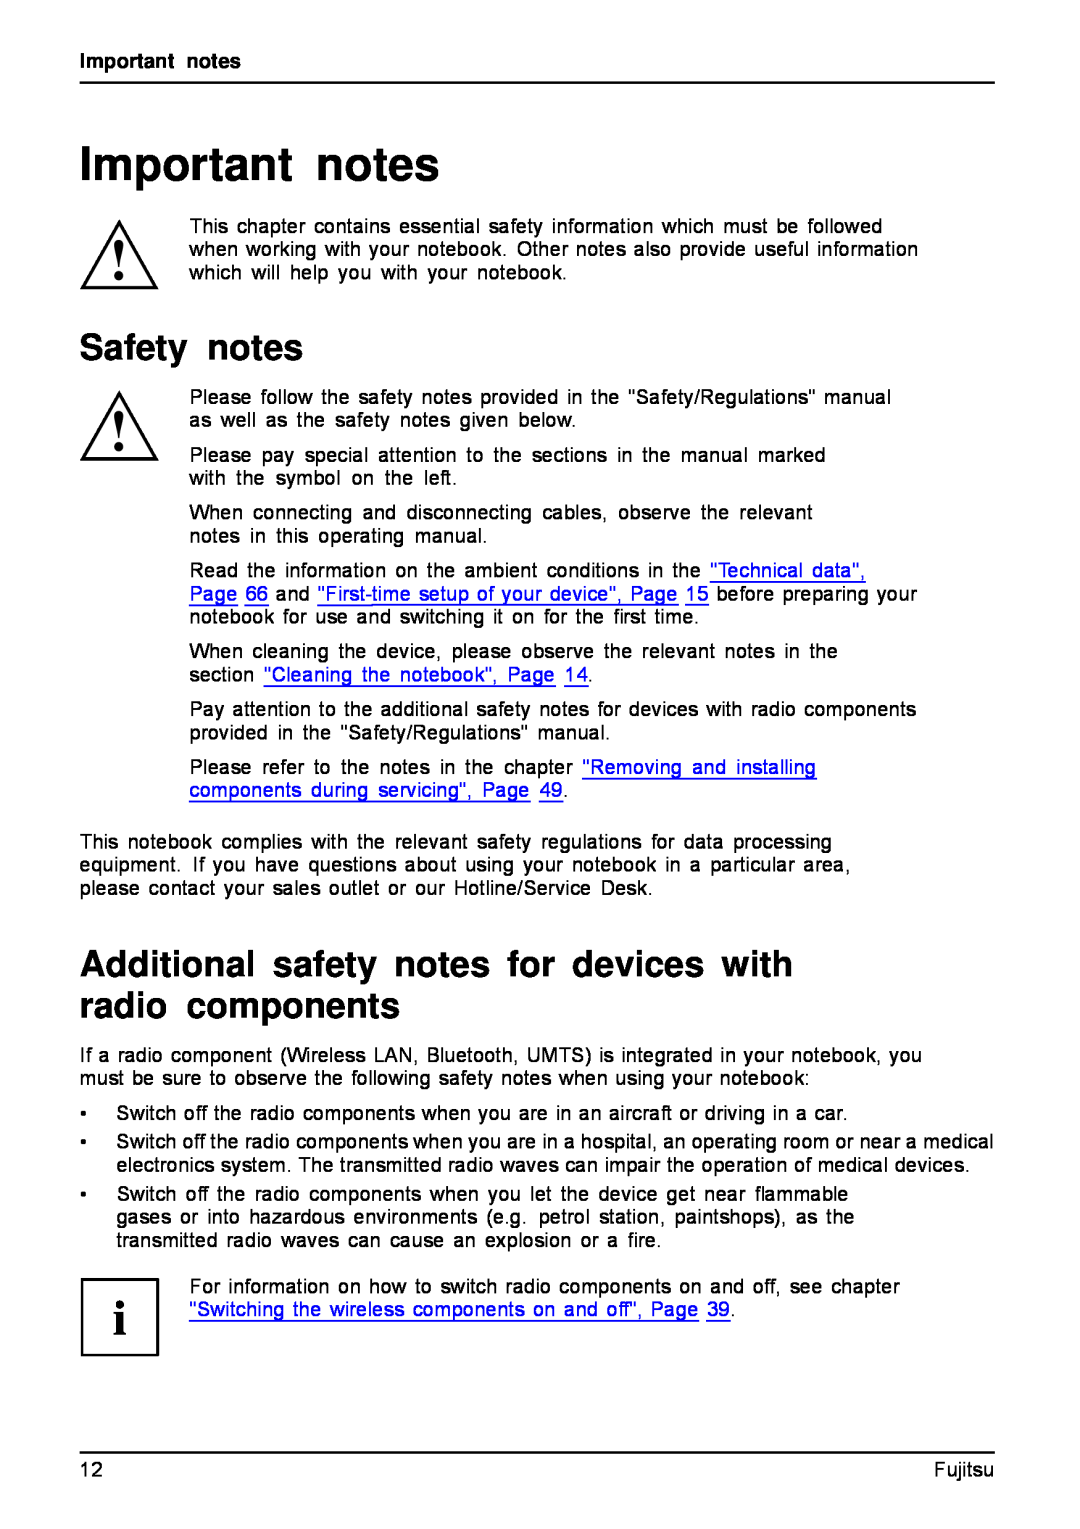 Fujitsu AH512, A512 manual Important notes, Safety notes, Additional safety notes for devices with radio components 